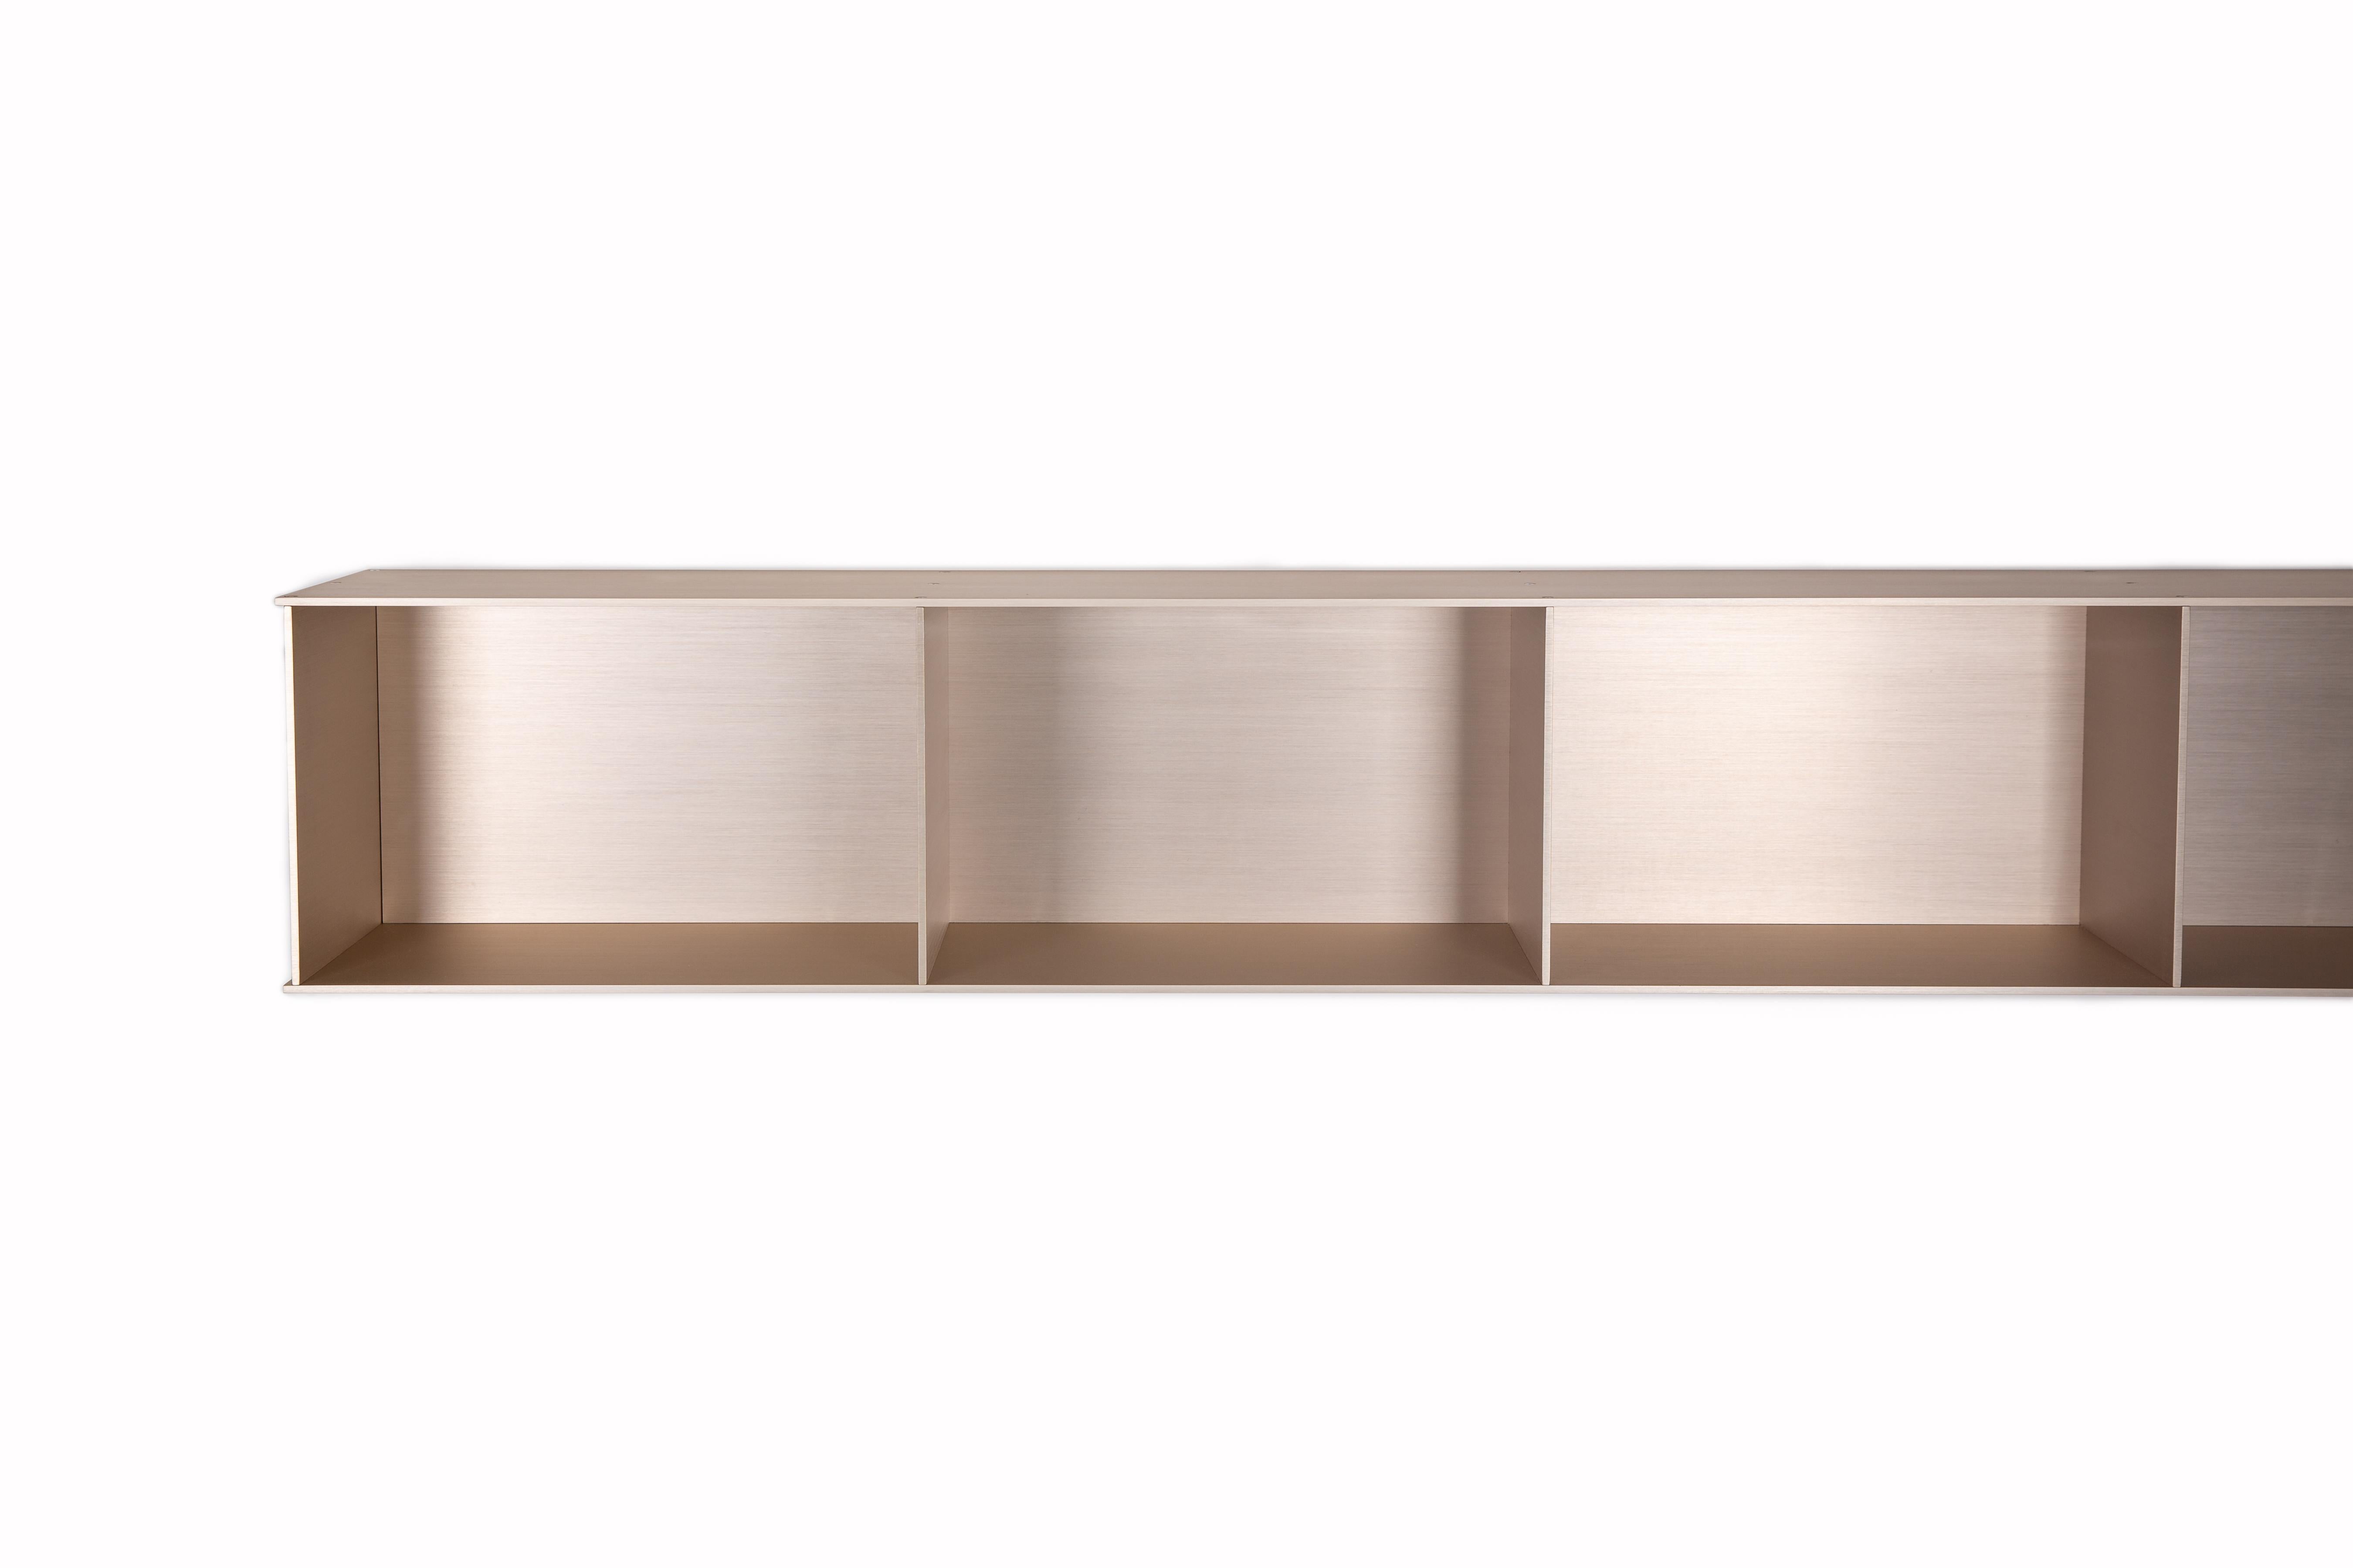 The Minimalist wall-mounted 4G shelf is sculpted out of 1/4 inch thick, brushed and anodized. Each shelf has an inset bolted U-channel that spans the length of the shelf and easily mounts on included custom-bent steel Z-clips. Each bay of this